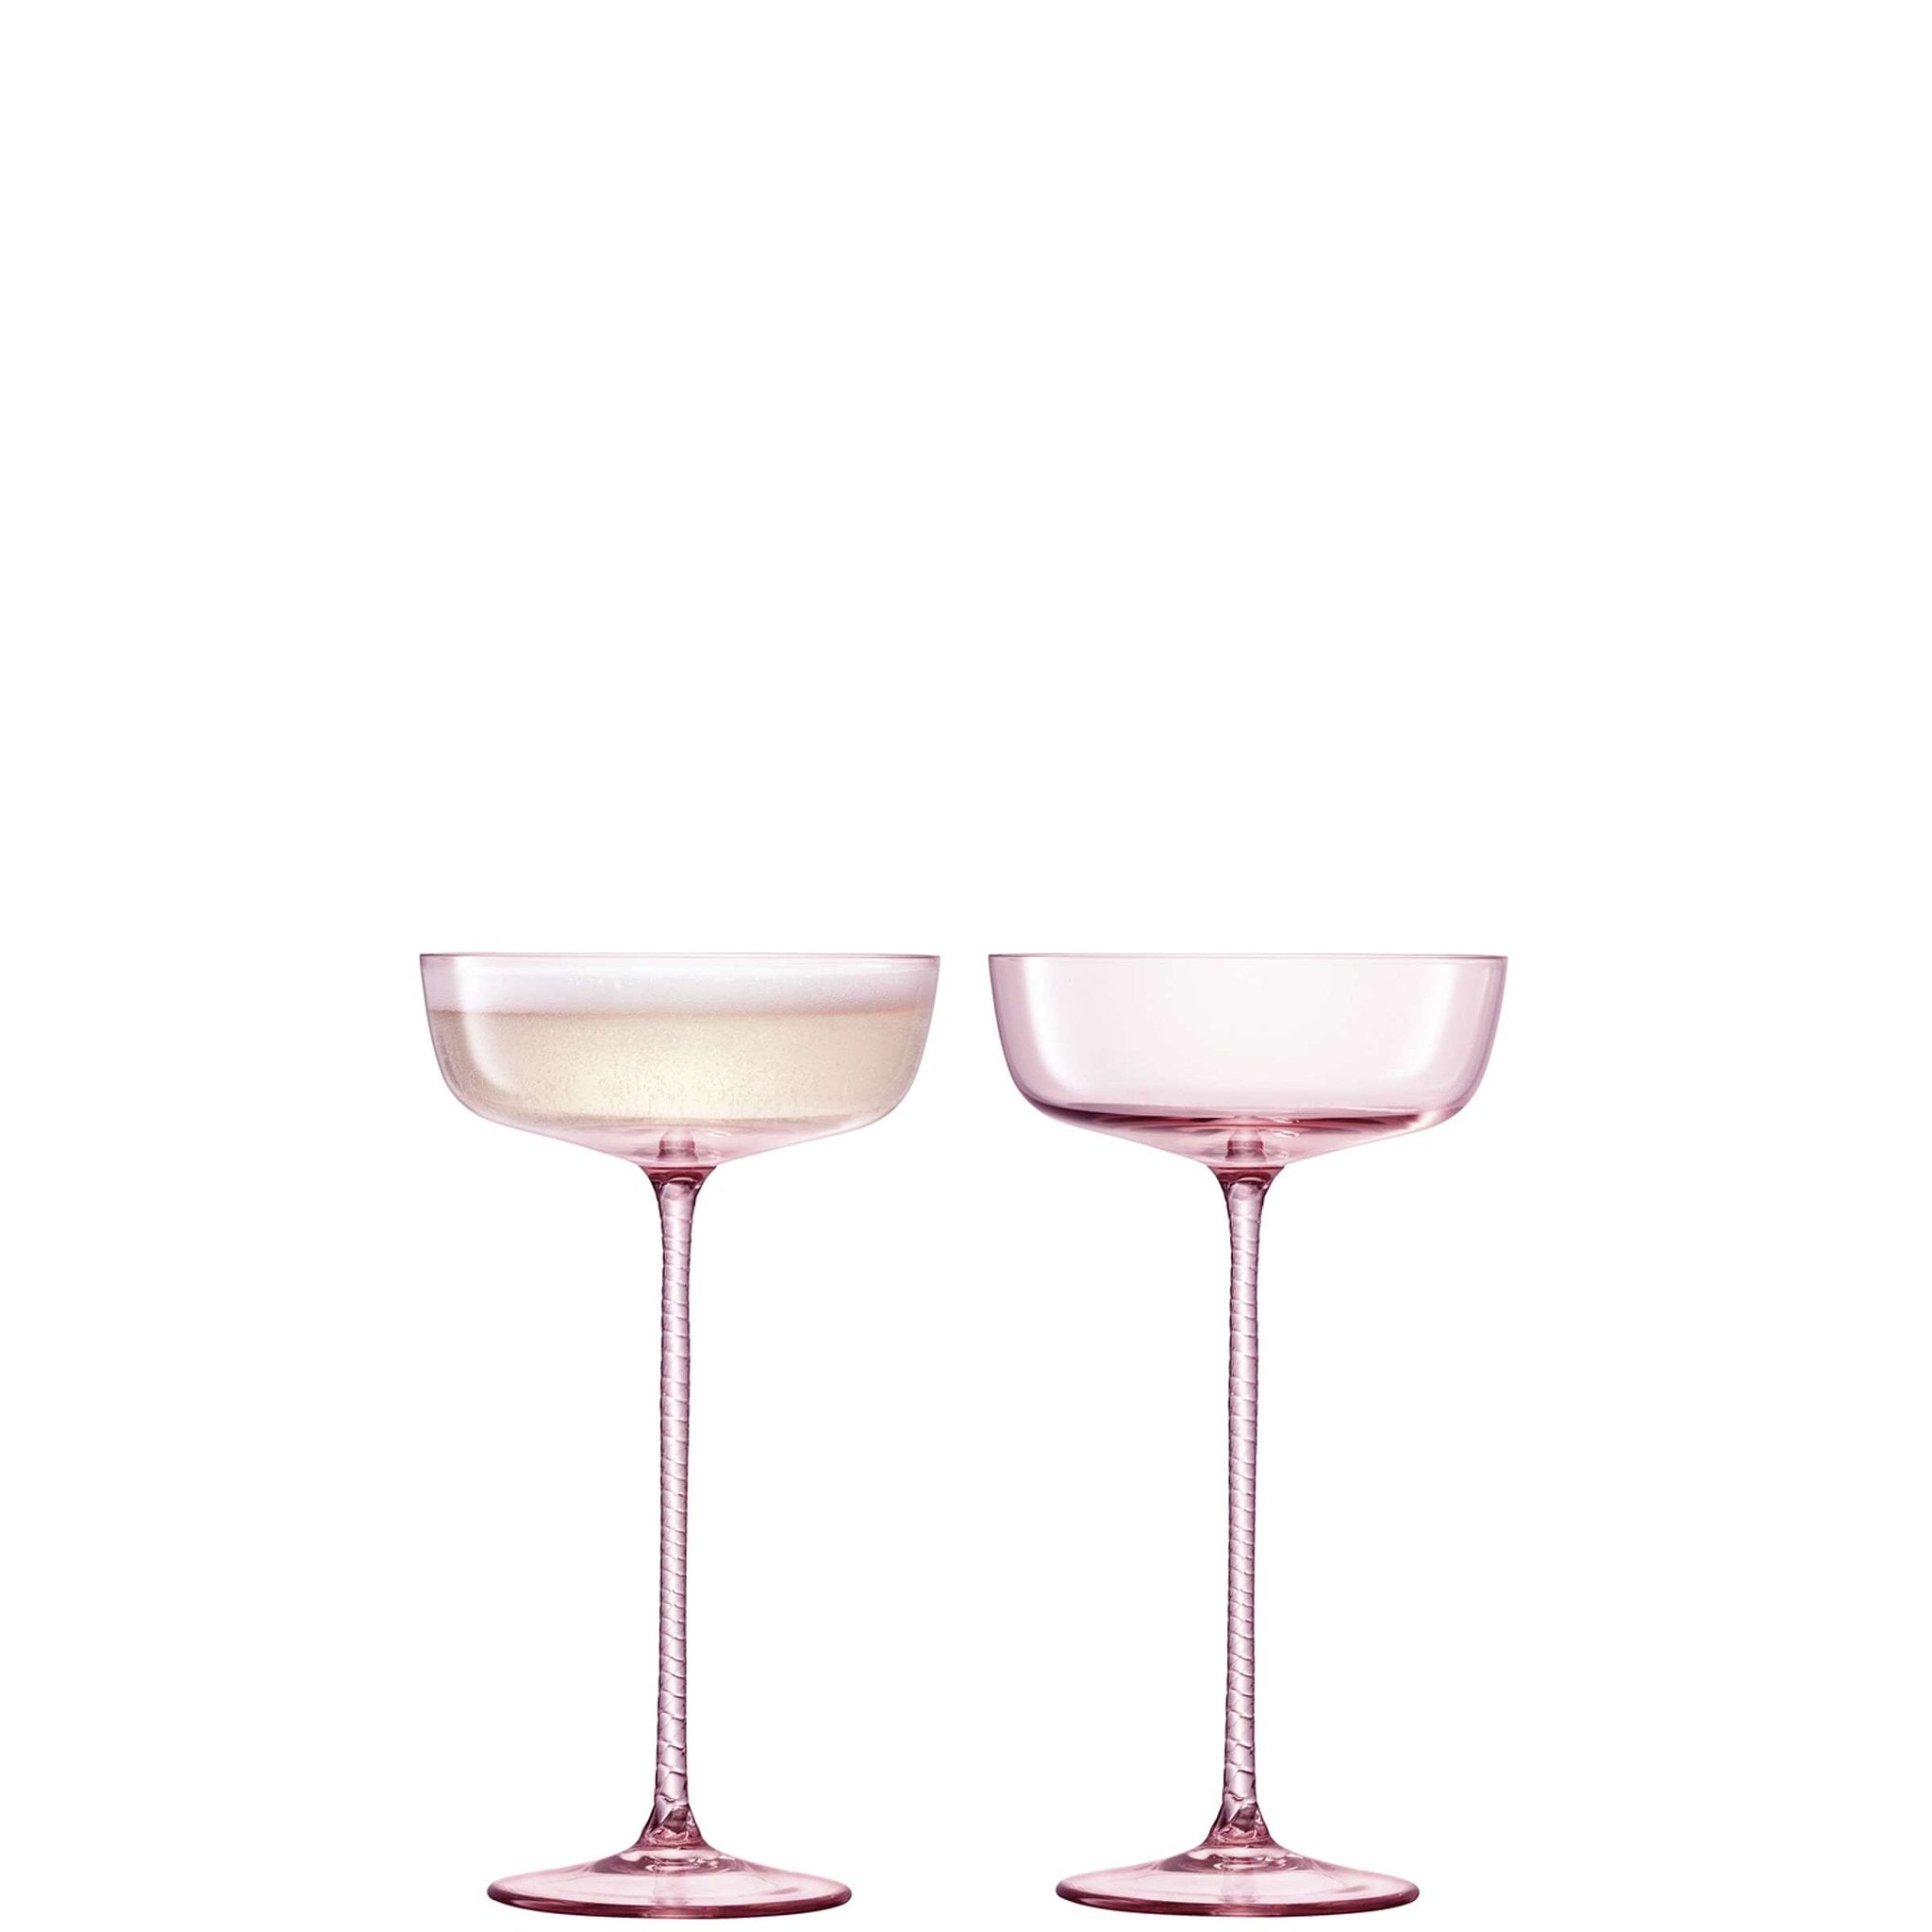 L.S.A. Champagne Theatre Champagne Saucer 190 ml Set of 2 Pieces